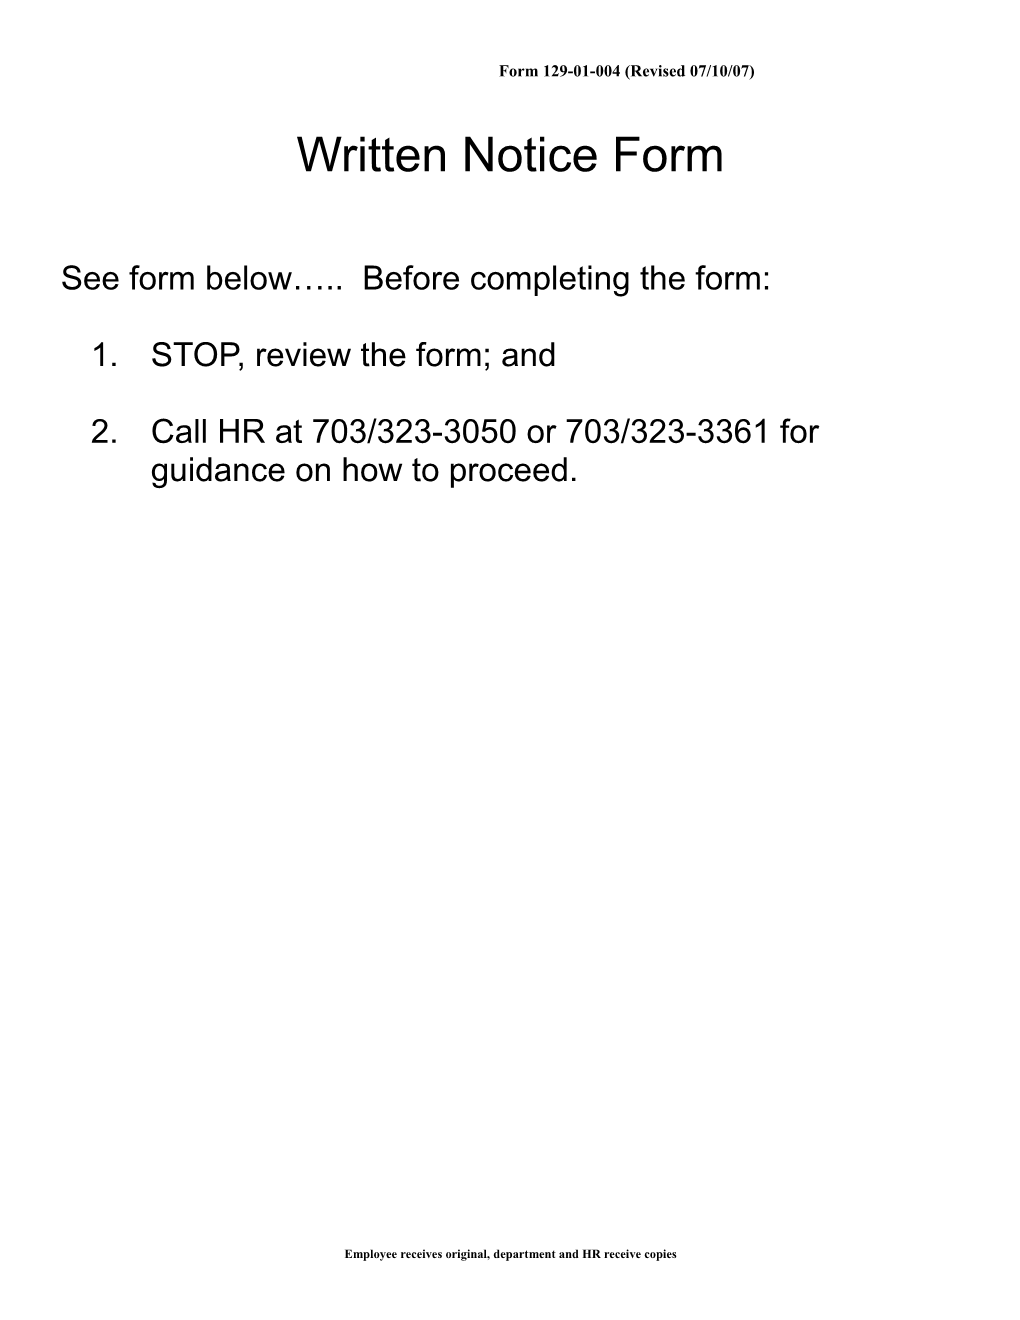 See Form Below Before Completing the Form